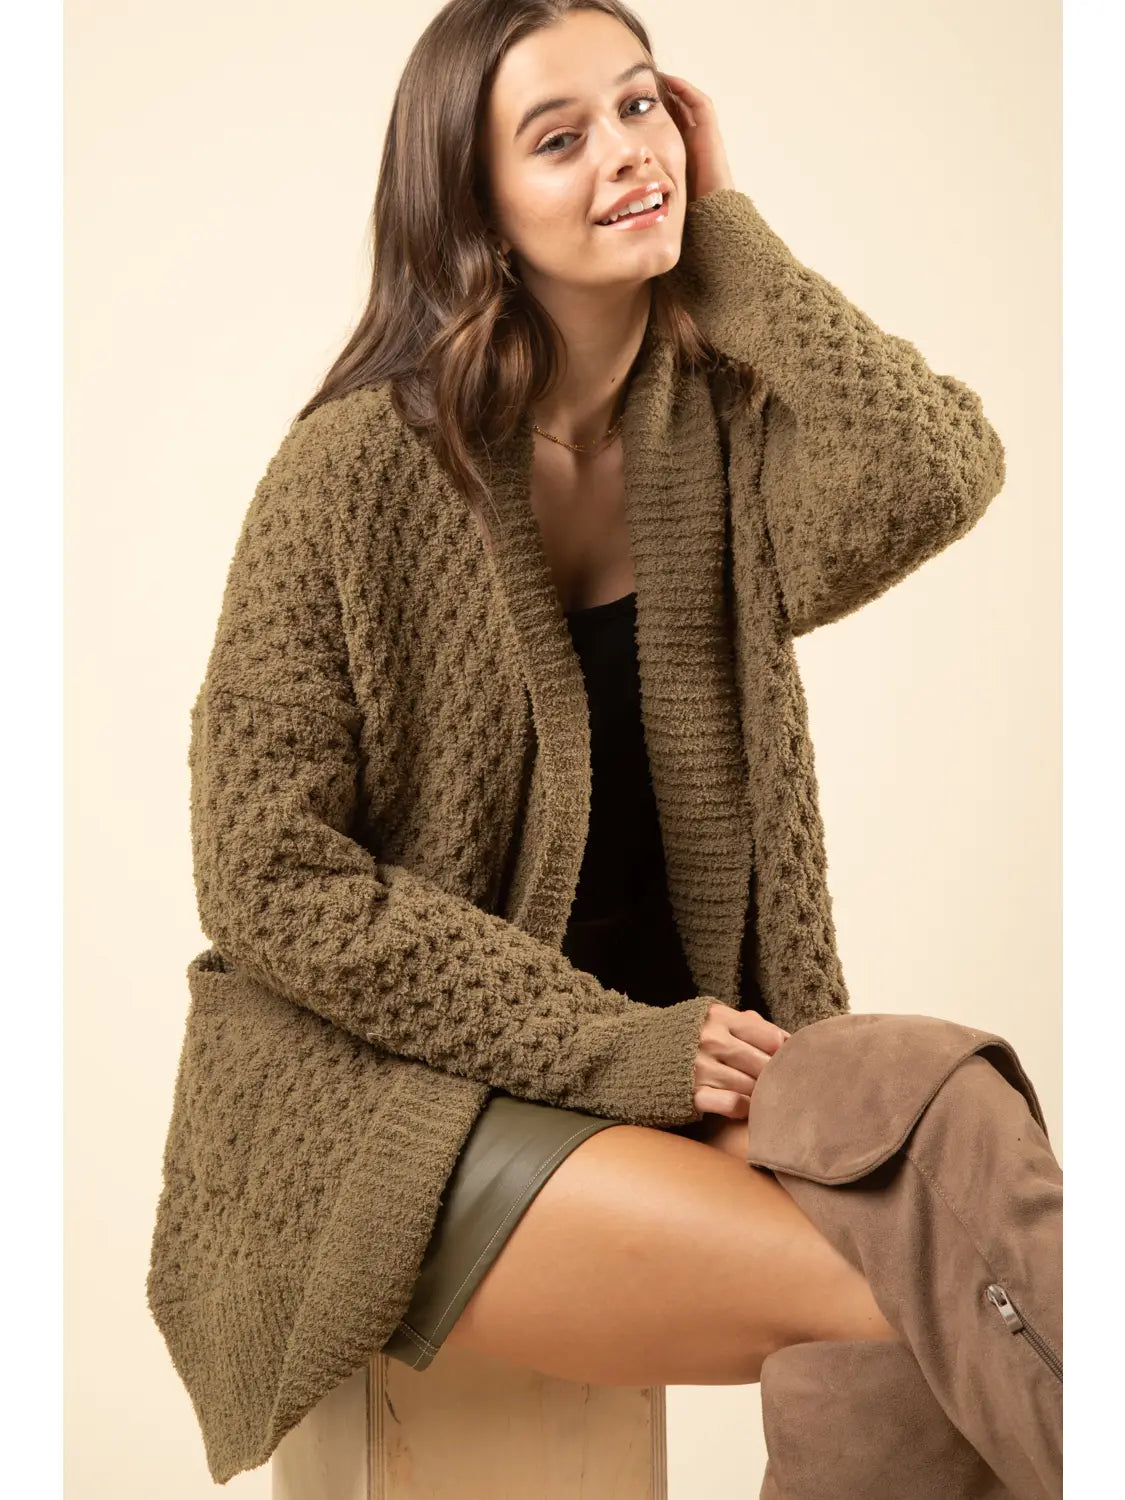 Comfy Textured Knit Cardigan - Multiple Colors